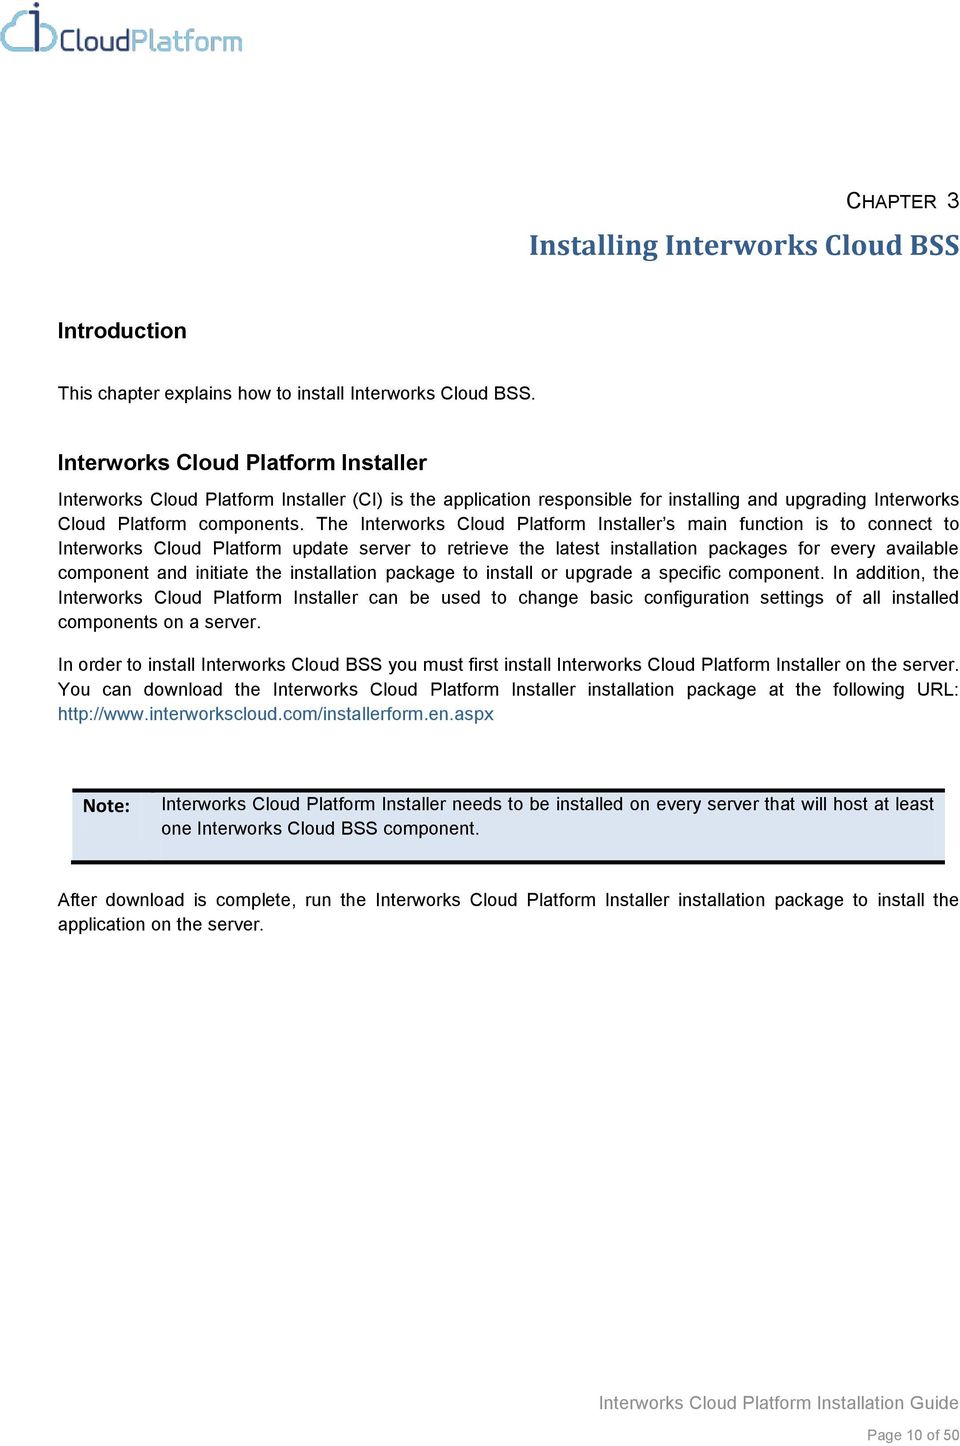 The Interworks Cloud Platform Installer s main function is to connect to Interworks Cloud Platform update server to retrieve the latest installation packages for every available component and